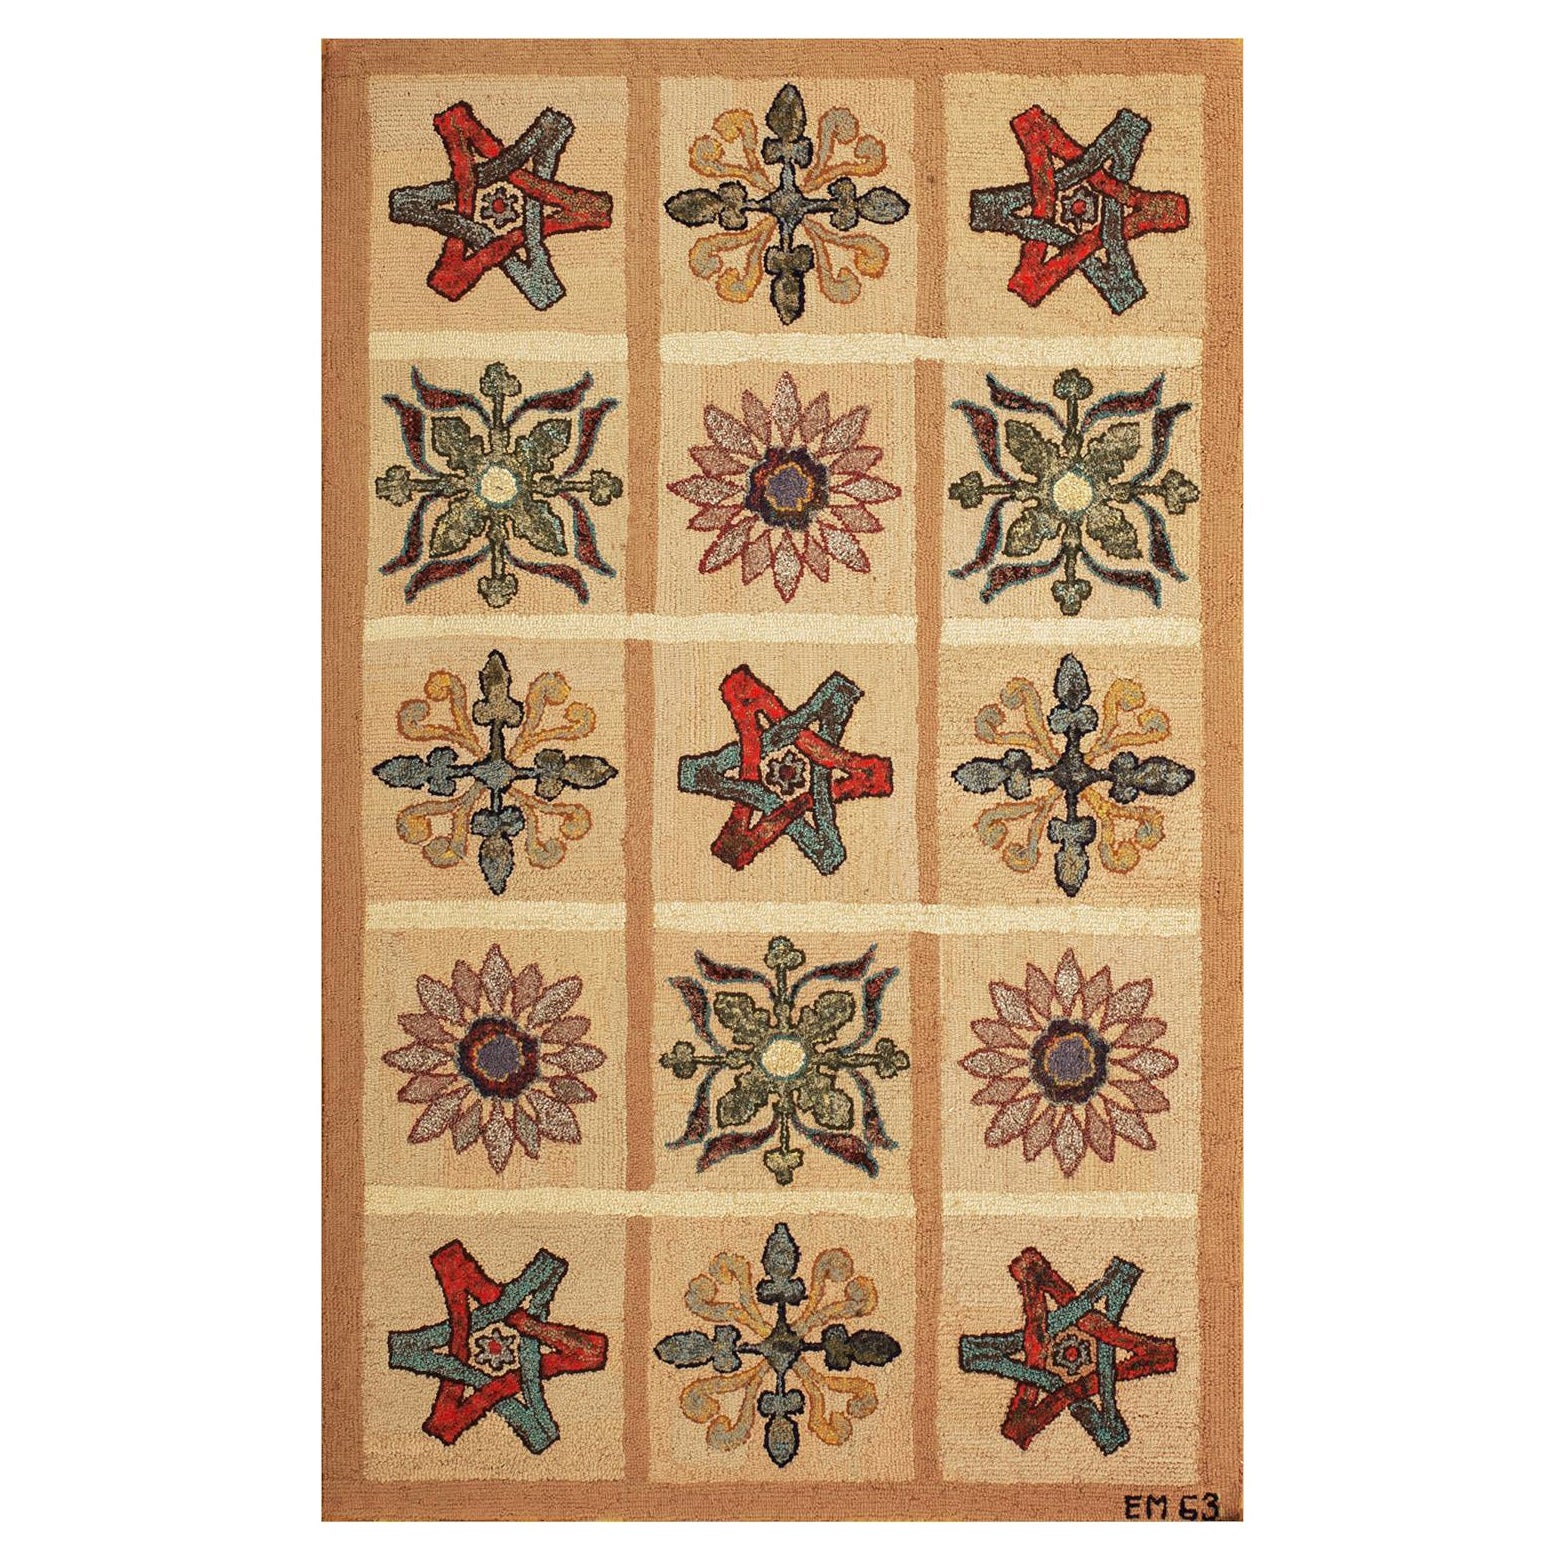 Mid 20th Century American Hooked Rug ( 2' 8" x 4' 2" - 82 x 127 cm )